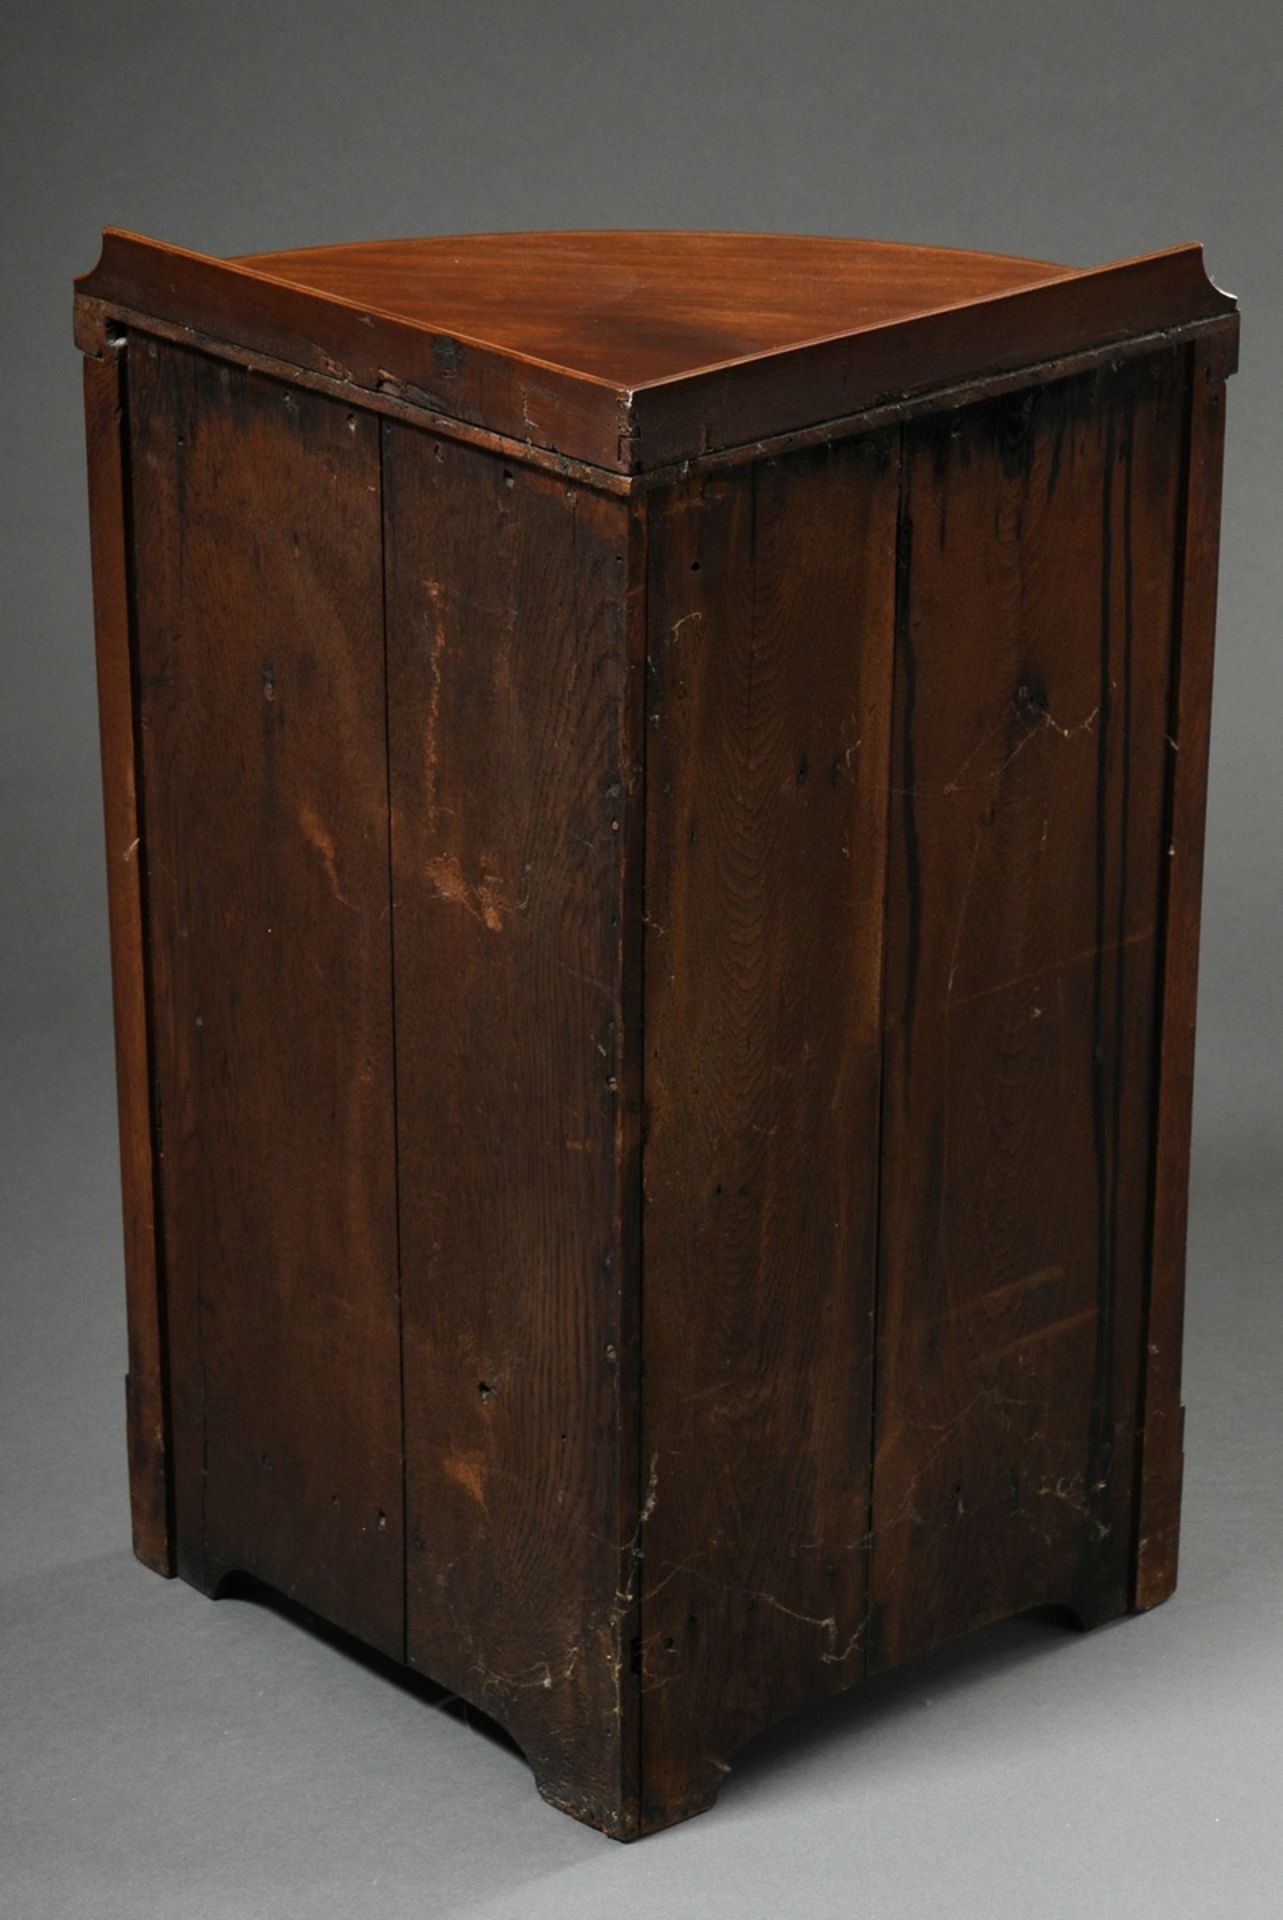 Small corner cupboard with rounded front, mahogany veneer with light inlays, England c. 1900, 82x62 - Image 5 of 5